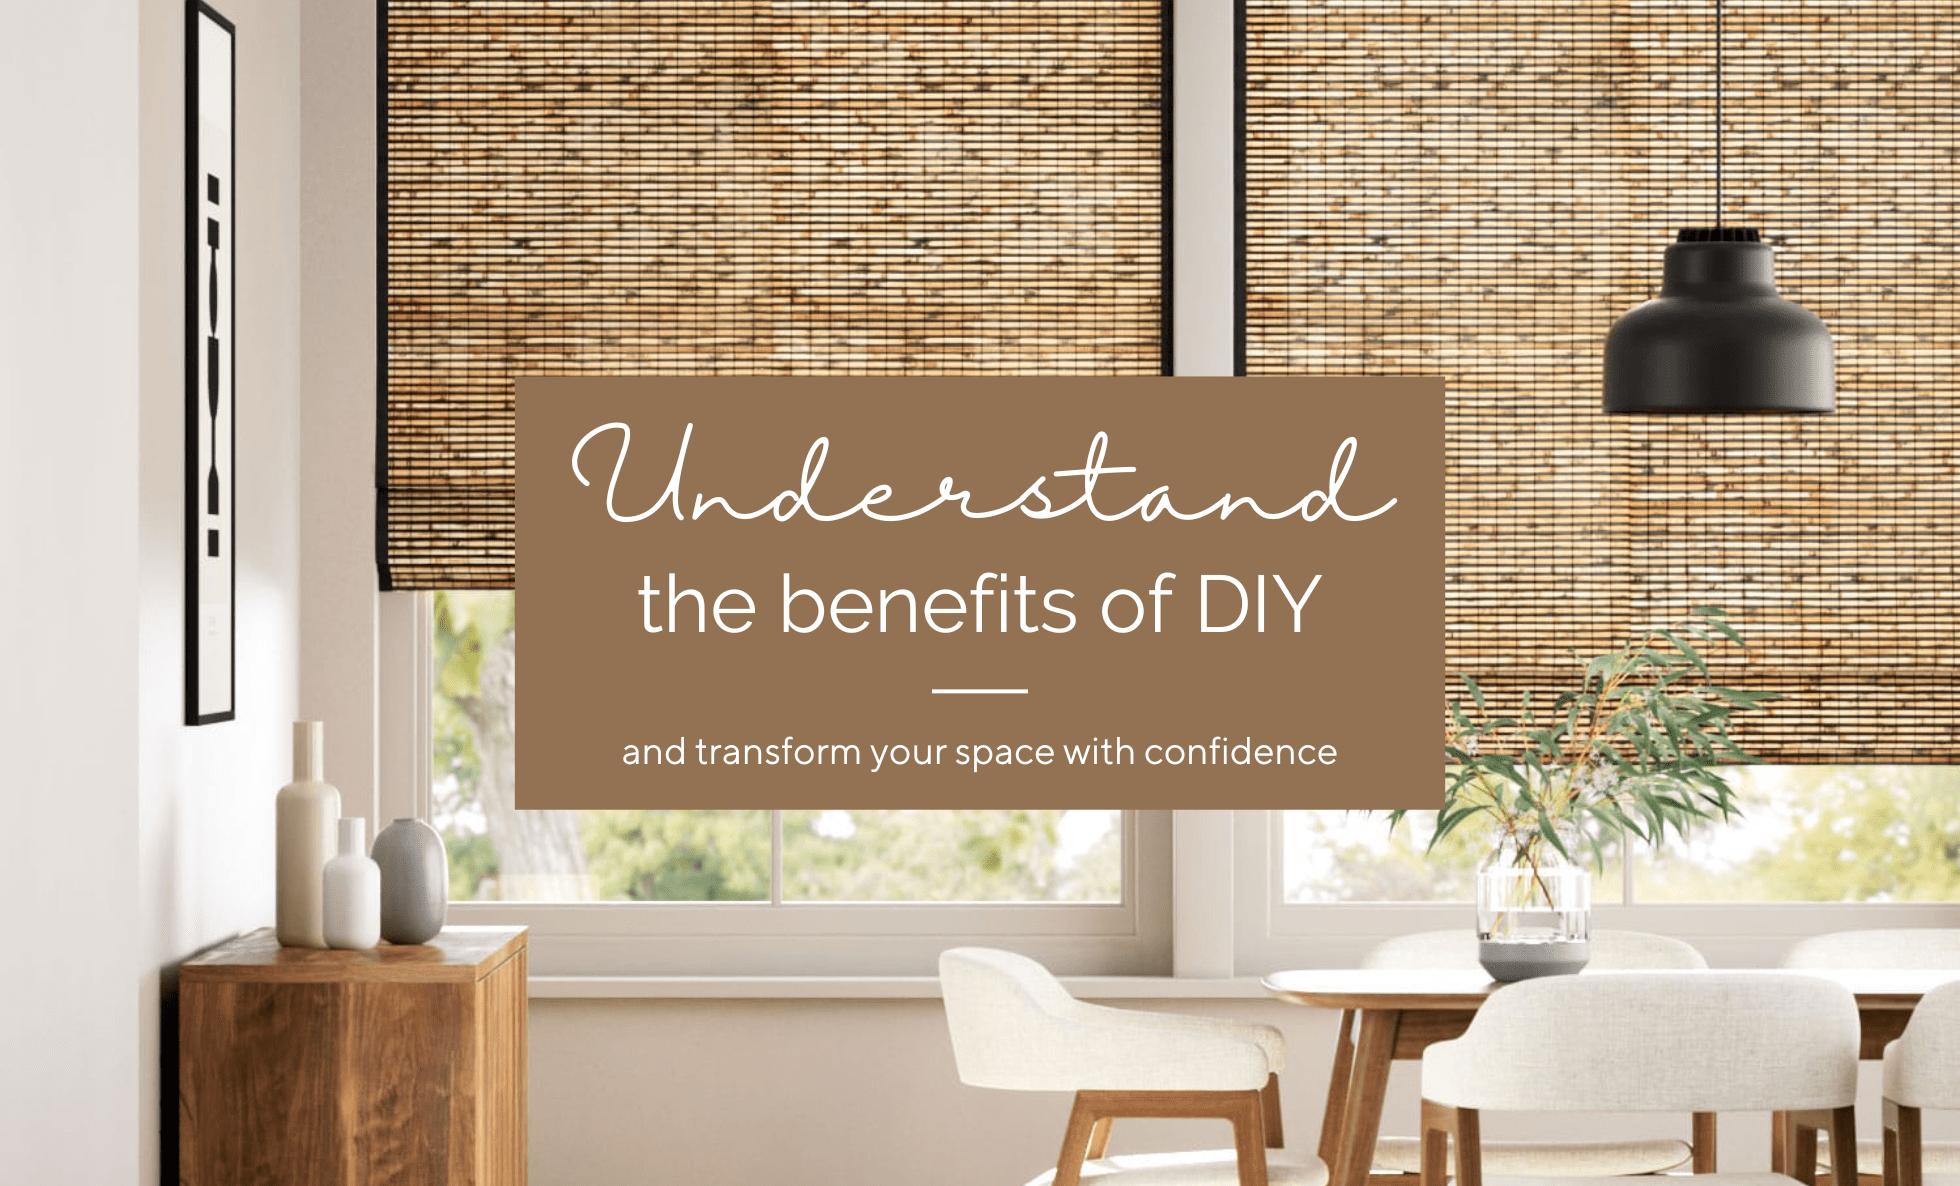 Feature image shows DIY bamboo roman blinds in a dining interior